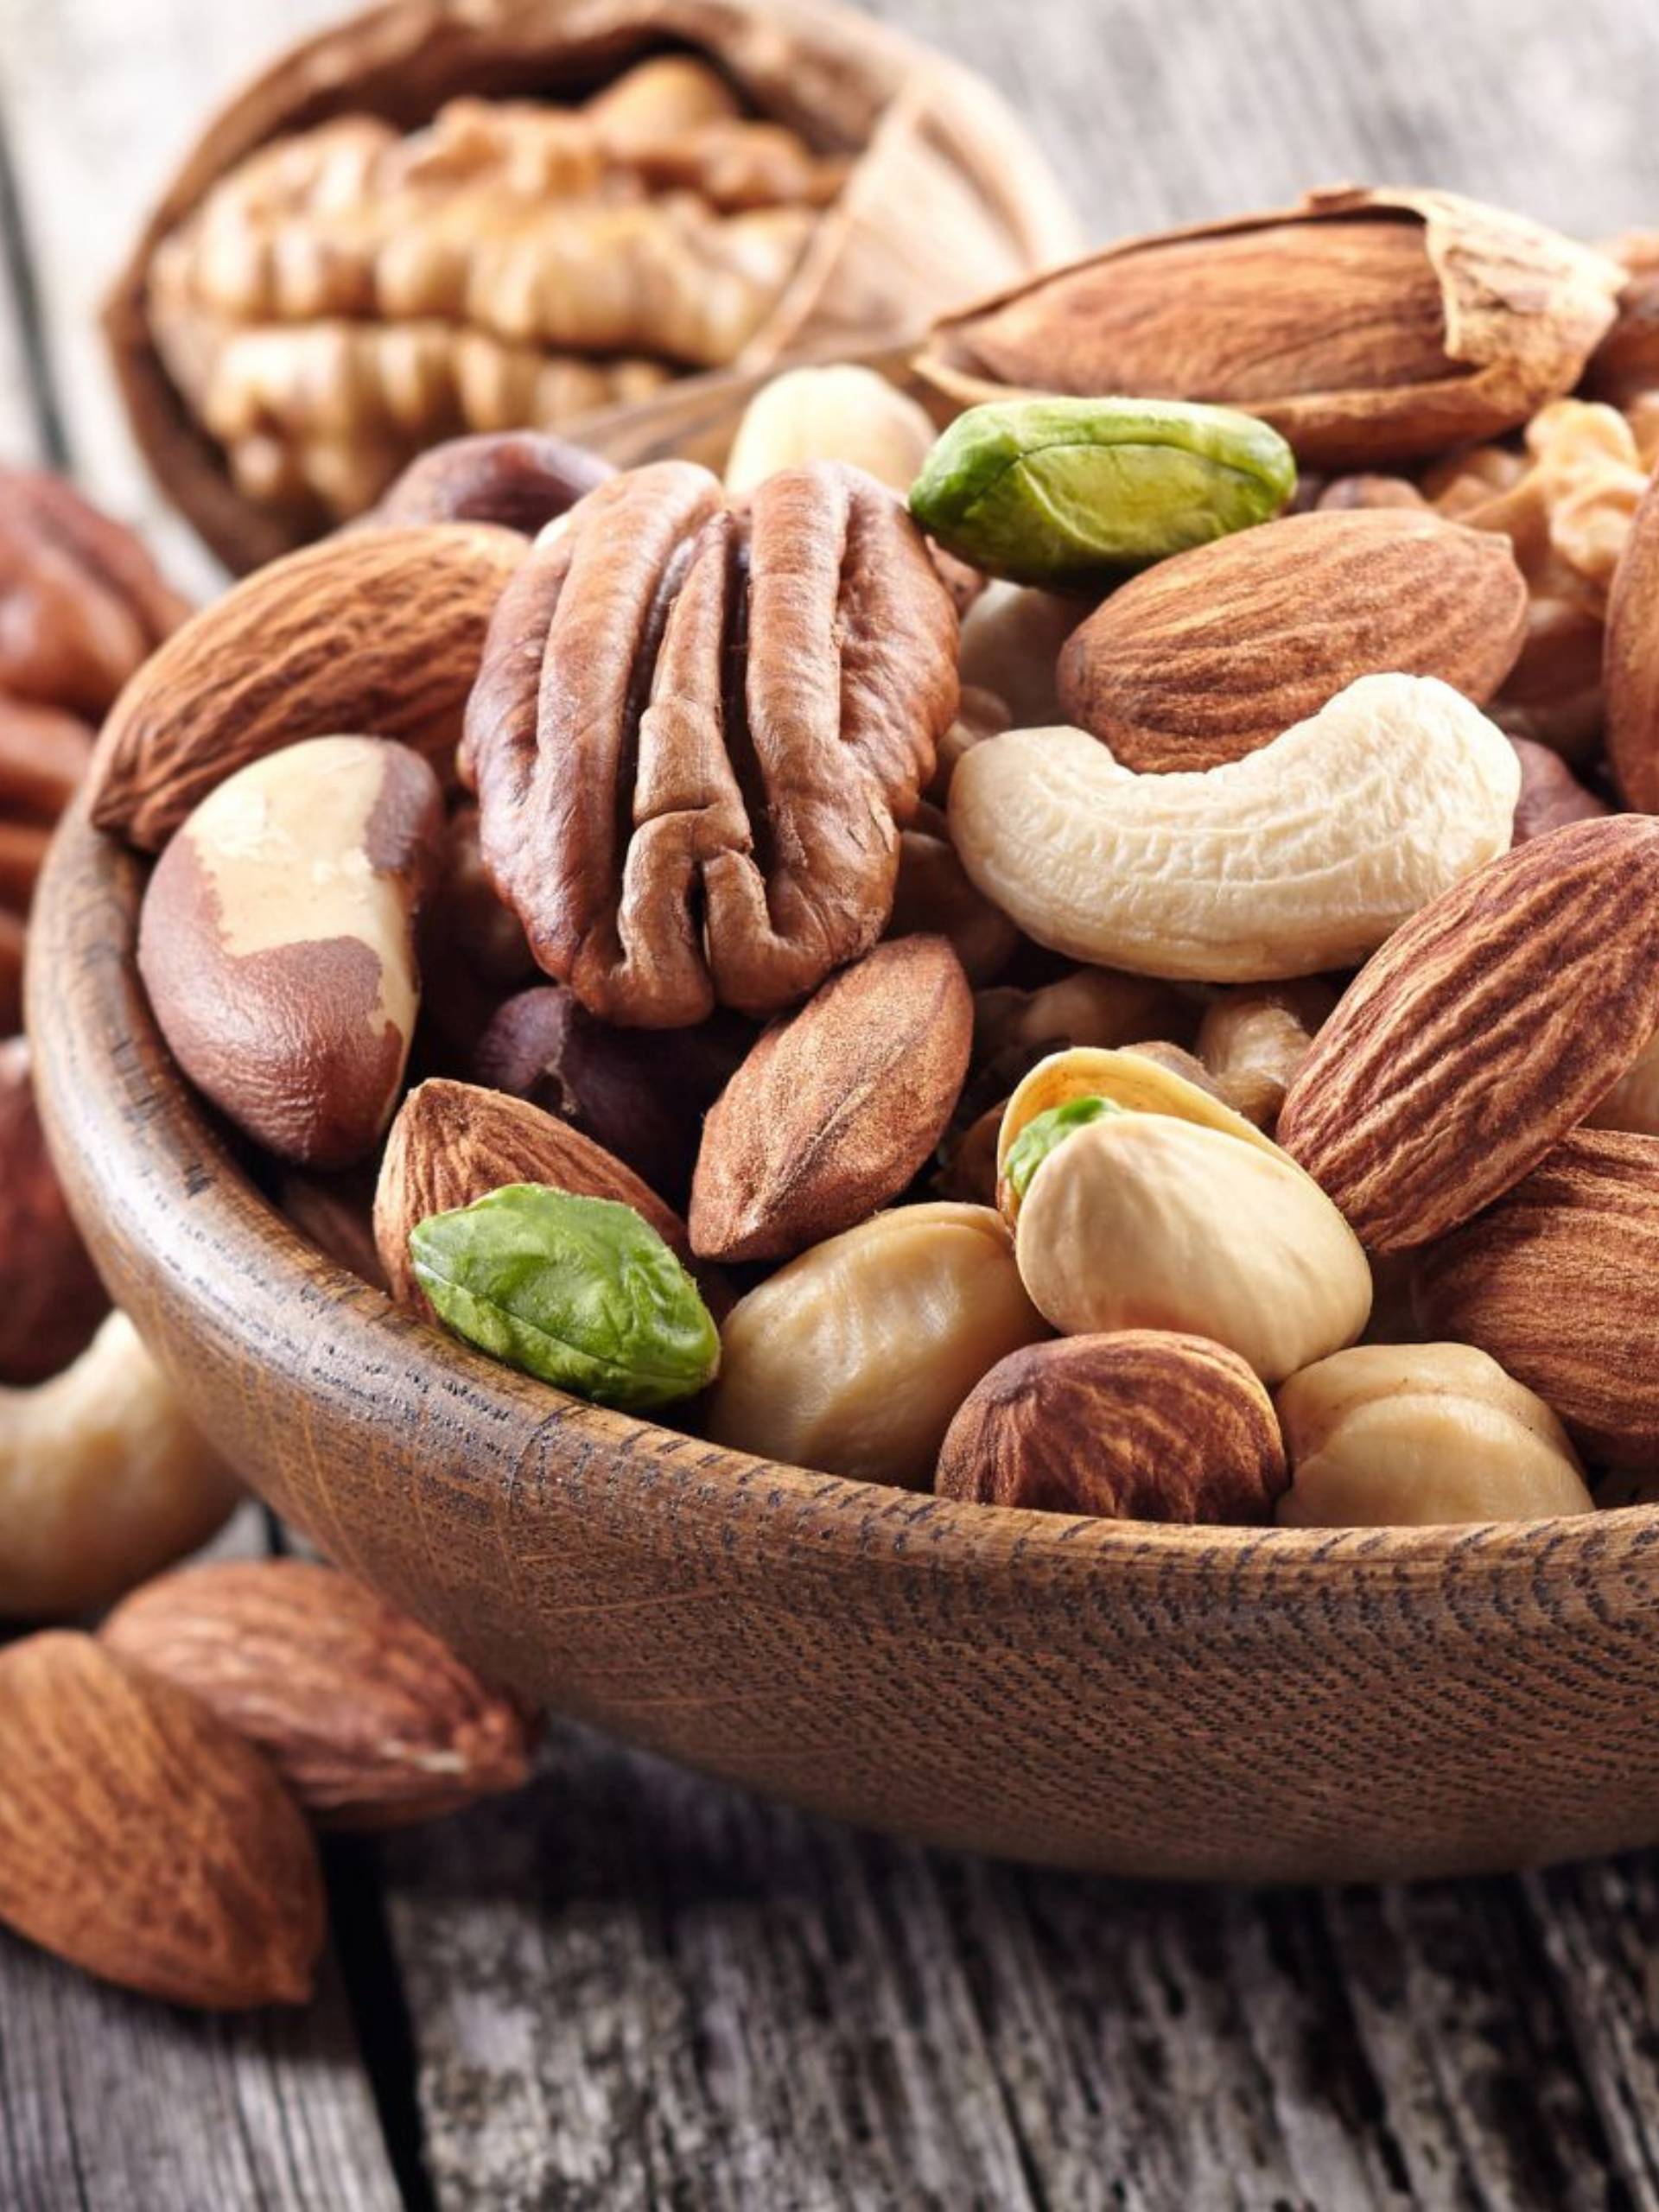 Passover Guide: What Nuts Are Kosher For Passover